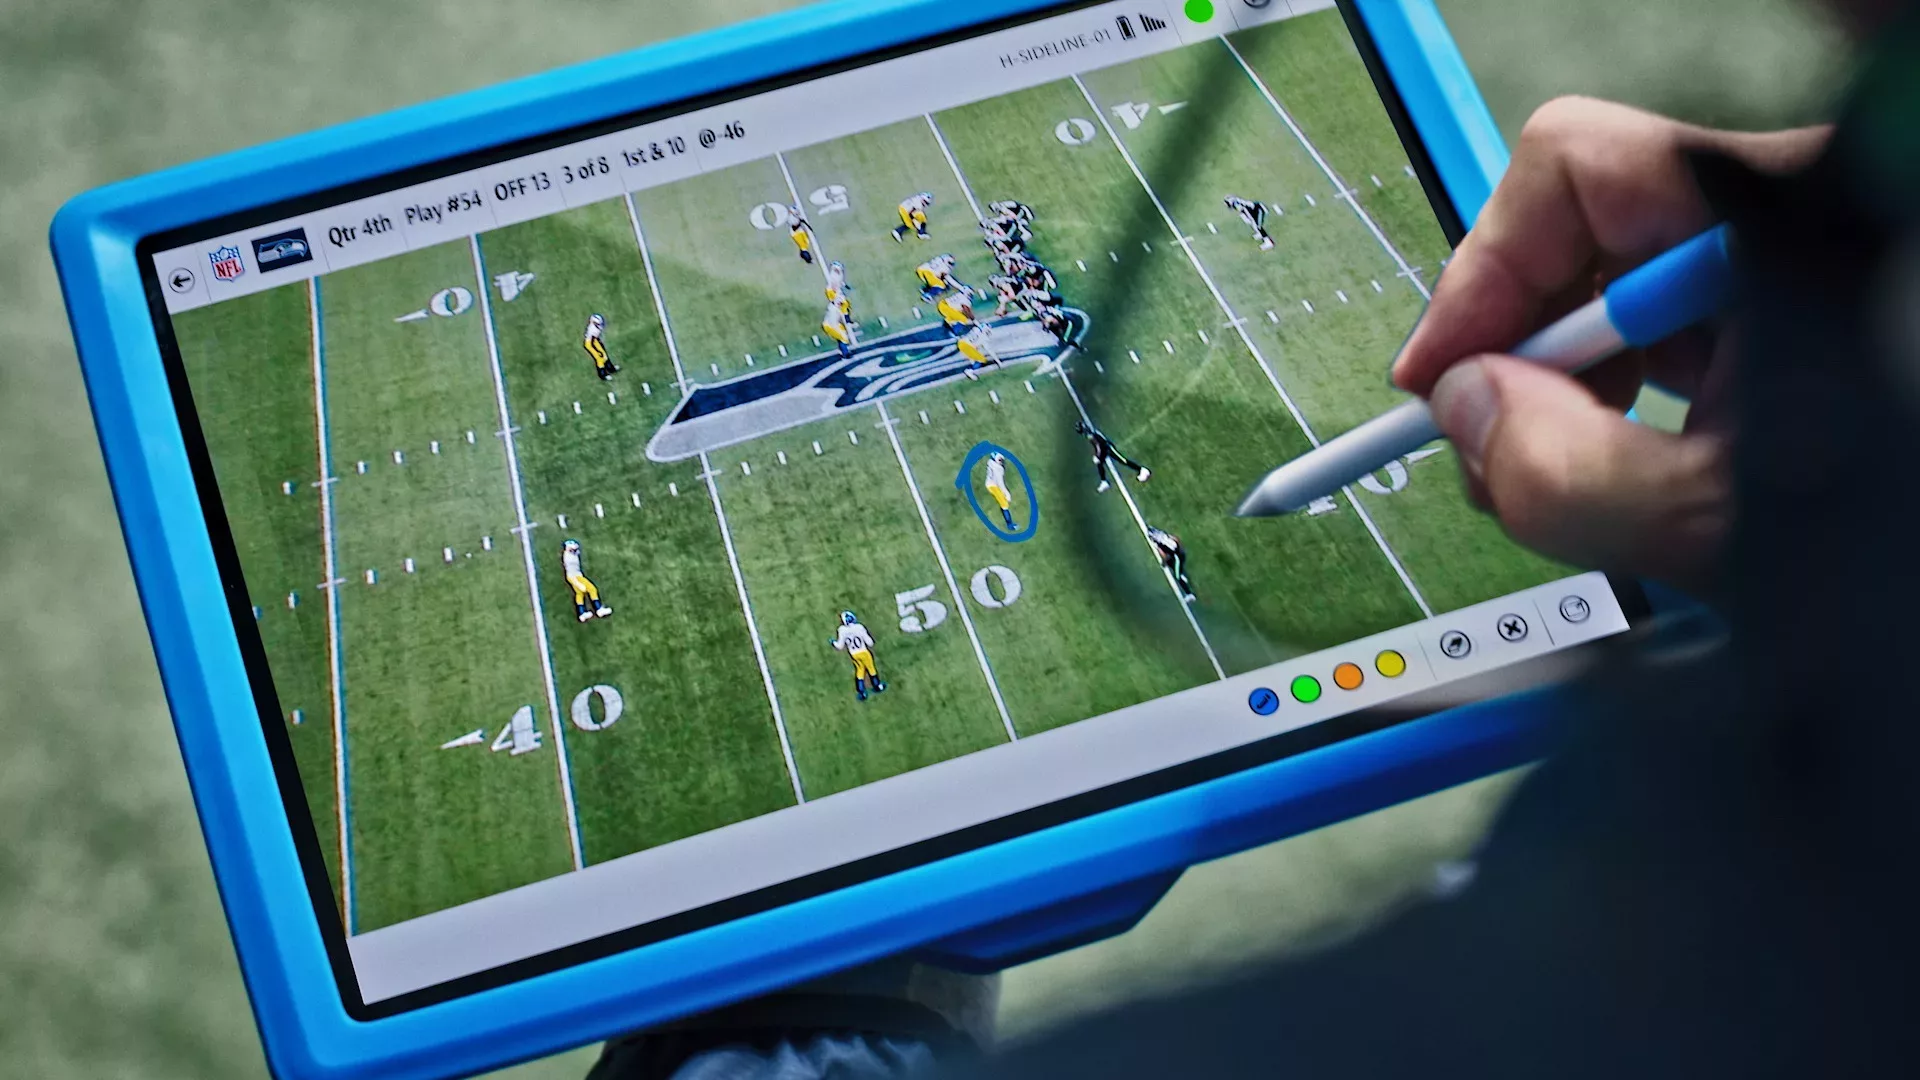 A close-up image of a Microsoft Surface with a football play visible on screen. A hand is visible in the lower right corner holding a digital stylus, making marks on the screen.